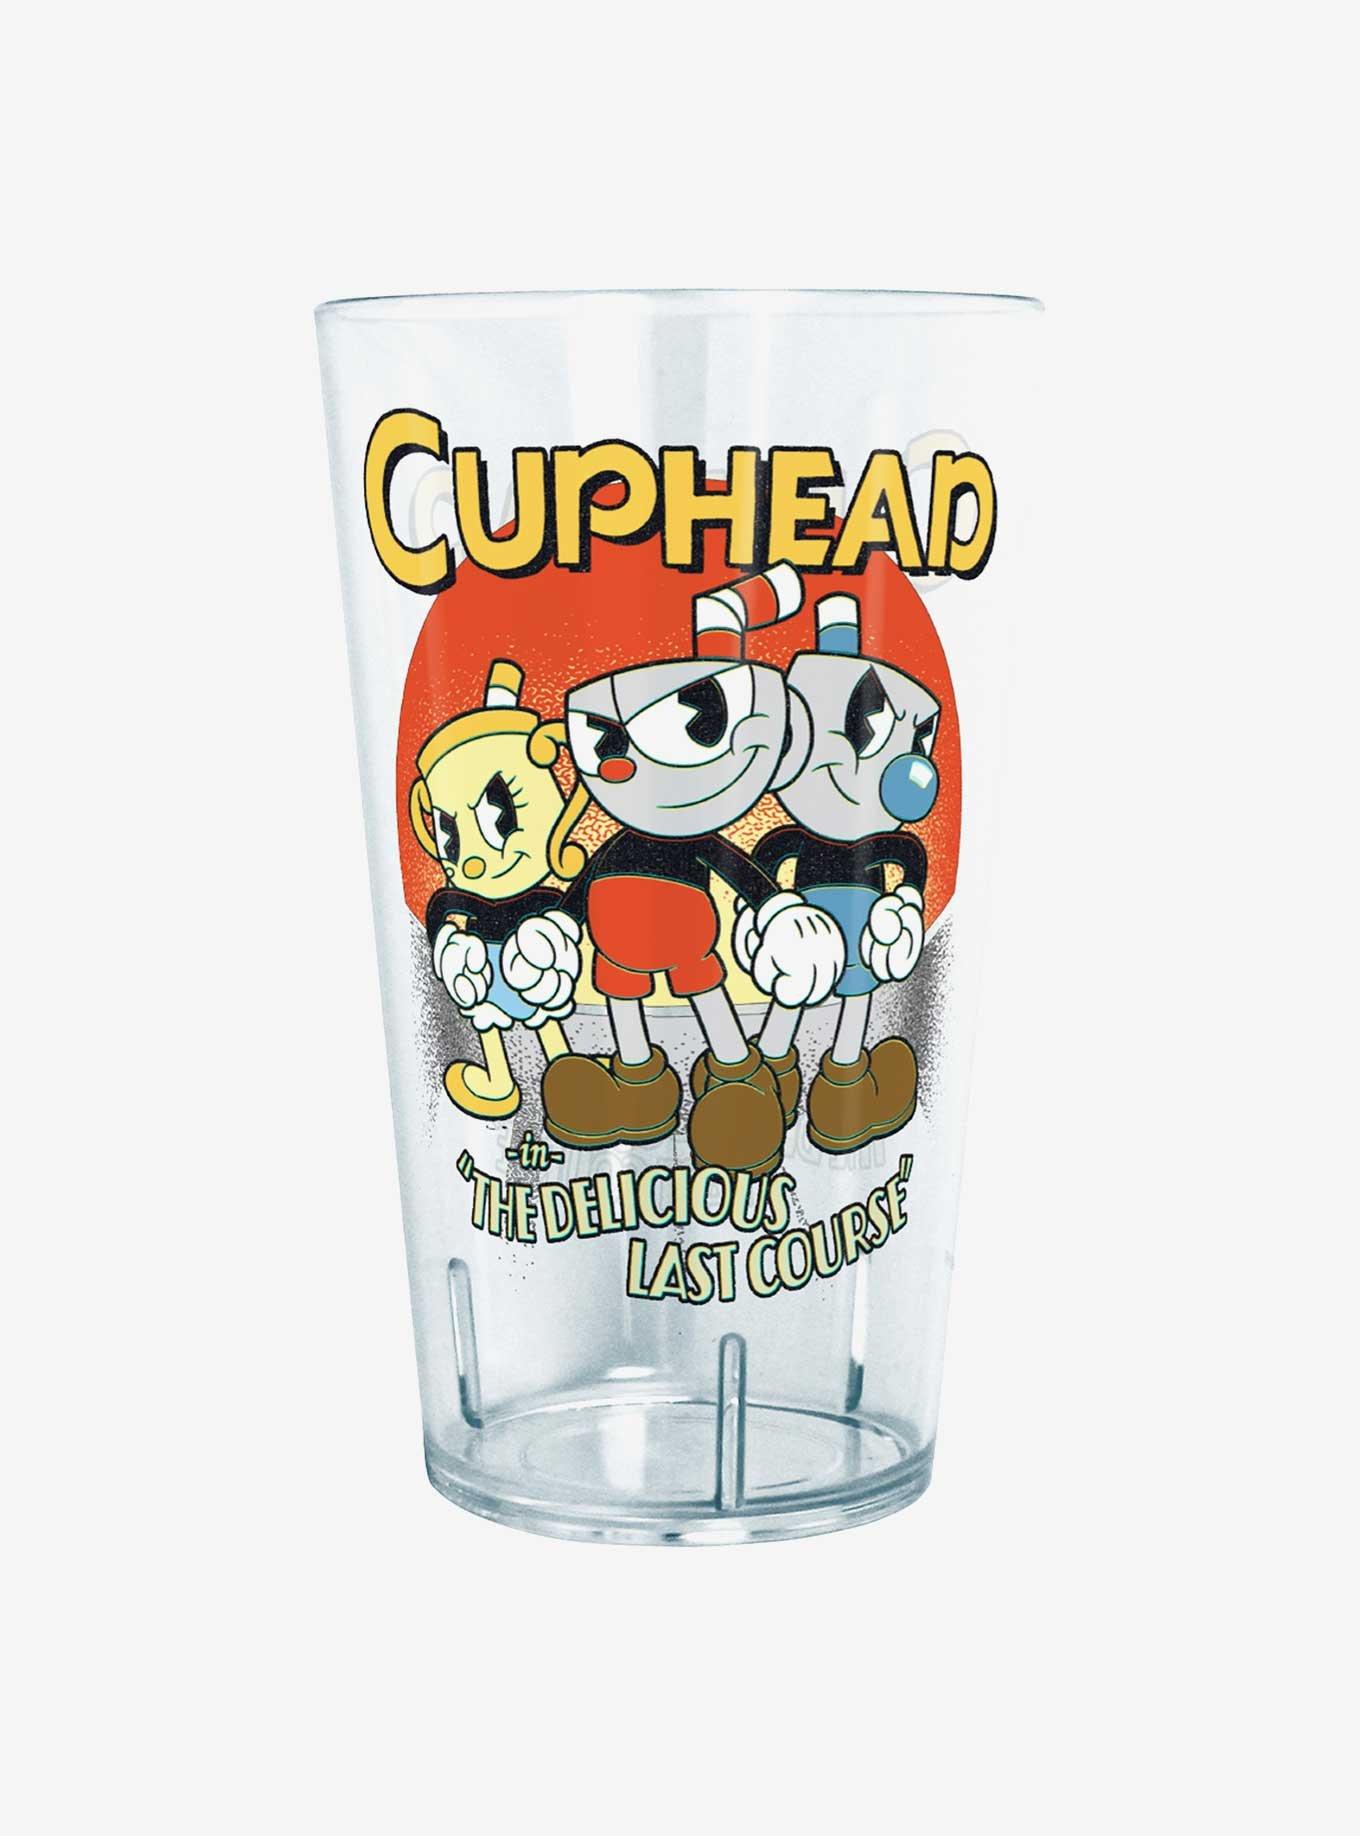 Ms. Chalice from Cuphead The Delicious Last Course Essential T-Shirt for  Sale by Lego4A